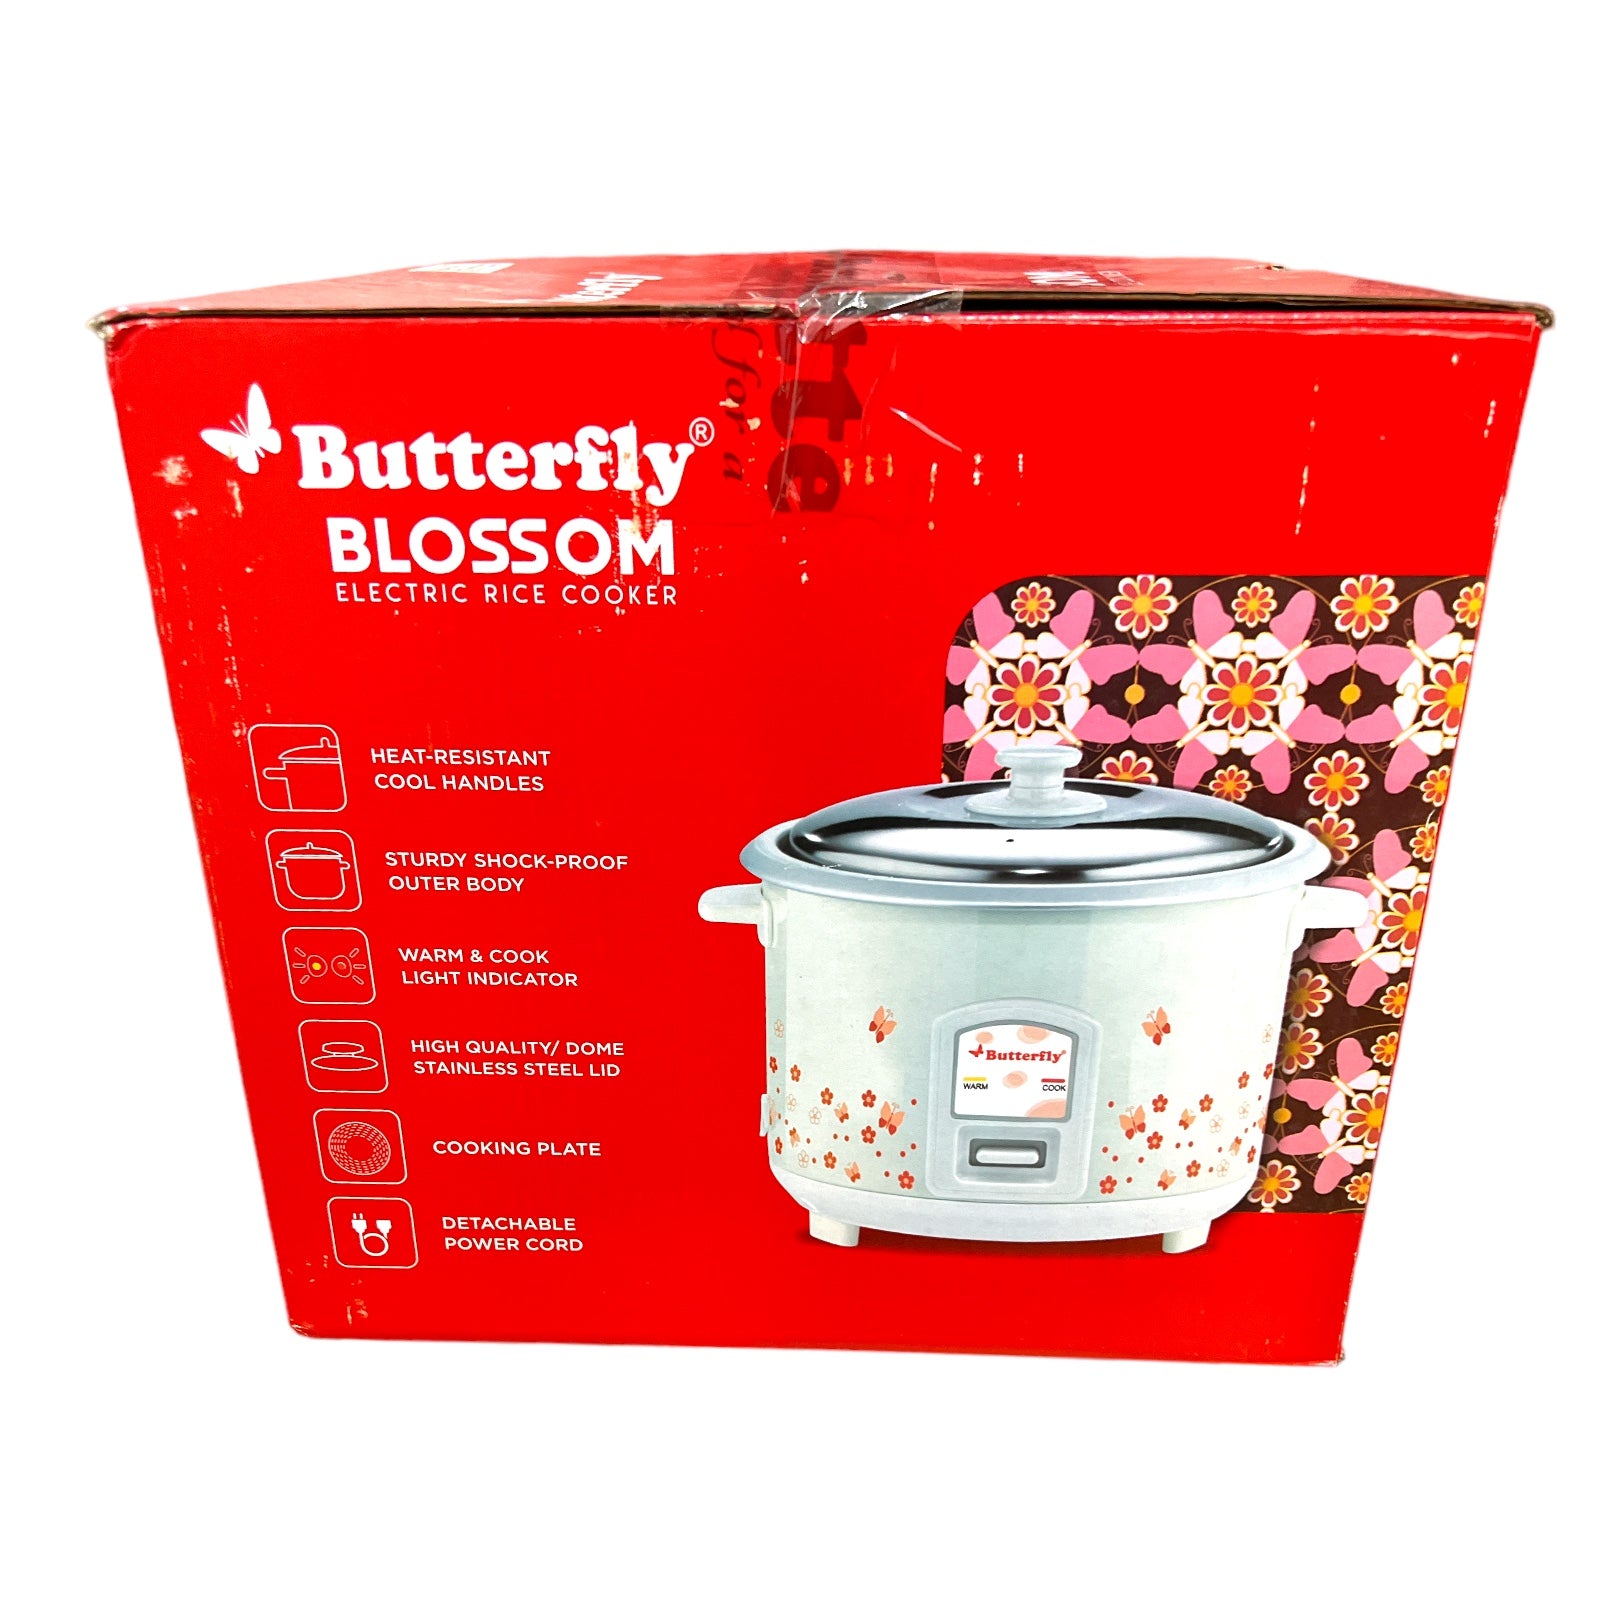 Butterfly blossom rice cooker 1.8 litres